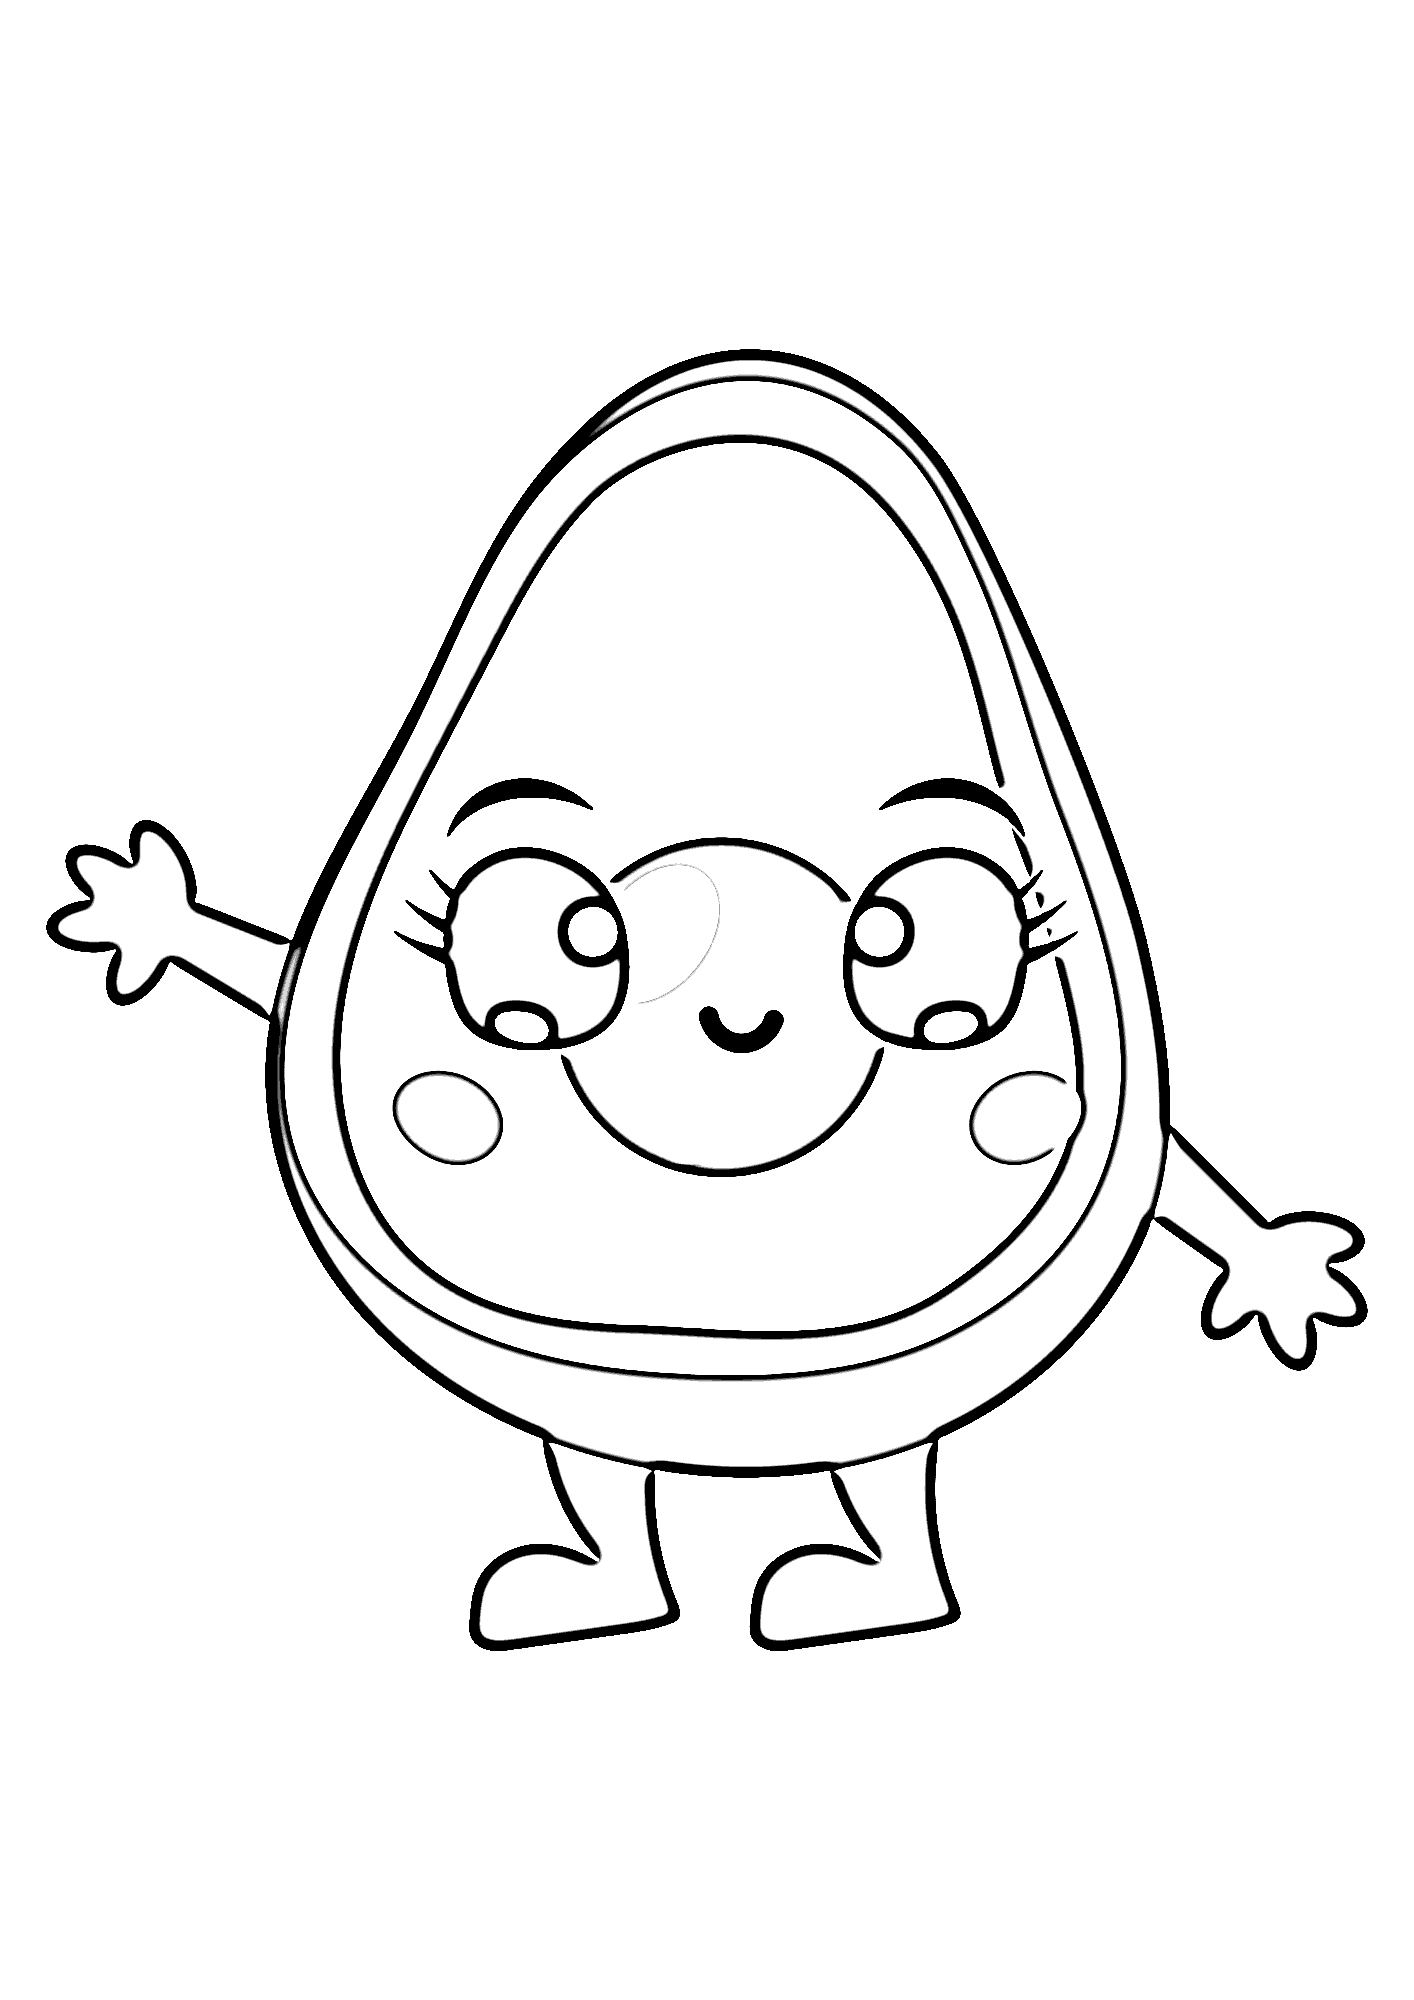 Sweet Avocado Coloring Page